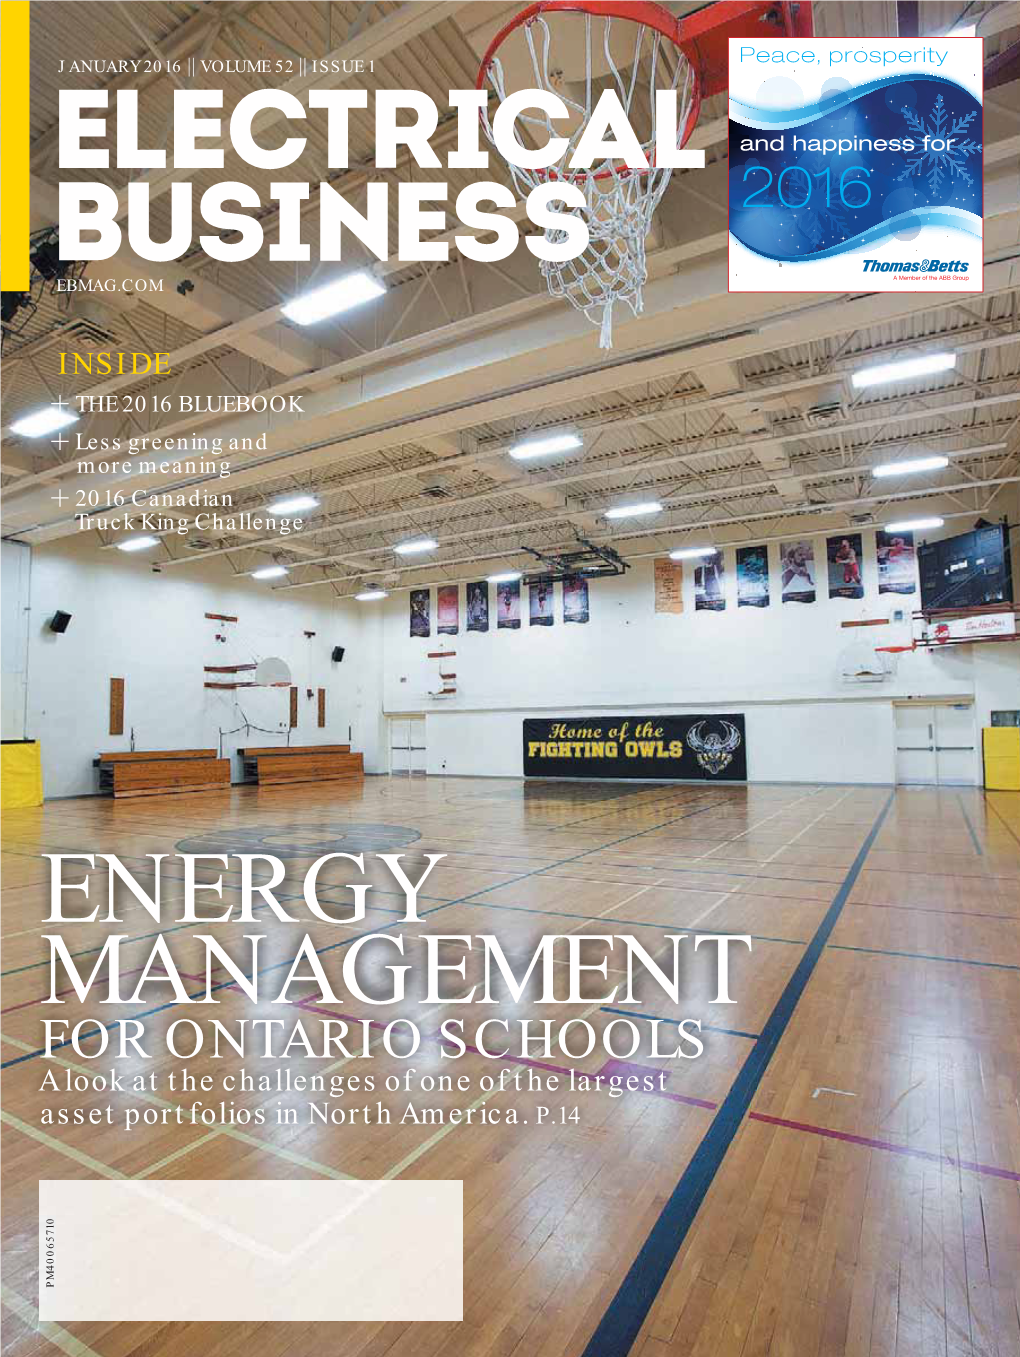 ENERGY MANAGEMENT for ONTARIO SCHOOLS a Look at the Challenges of One of the Largest Asset Portfolios in North America